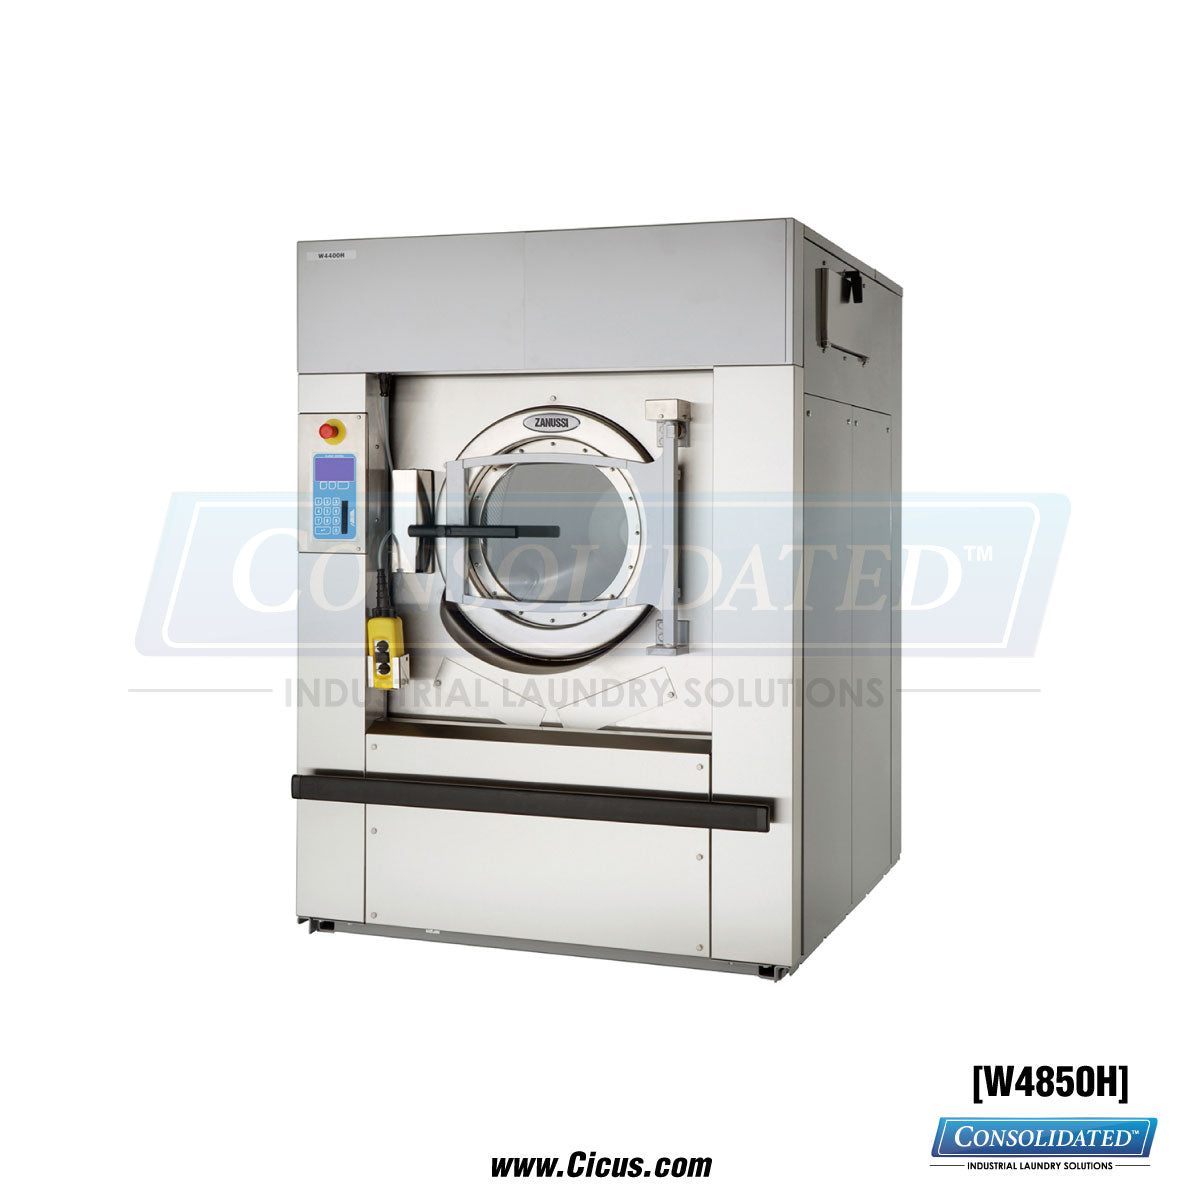 Electrolux G-Force Soft-Mount 200 LB Washer [W4850H]